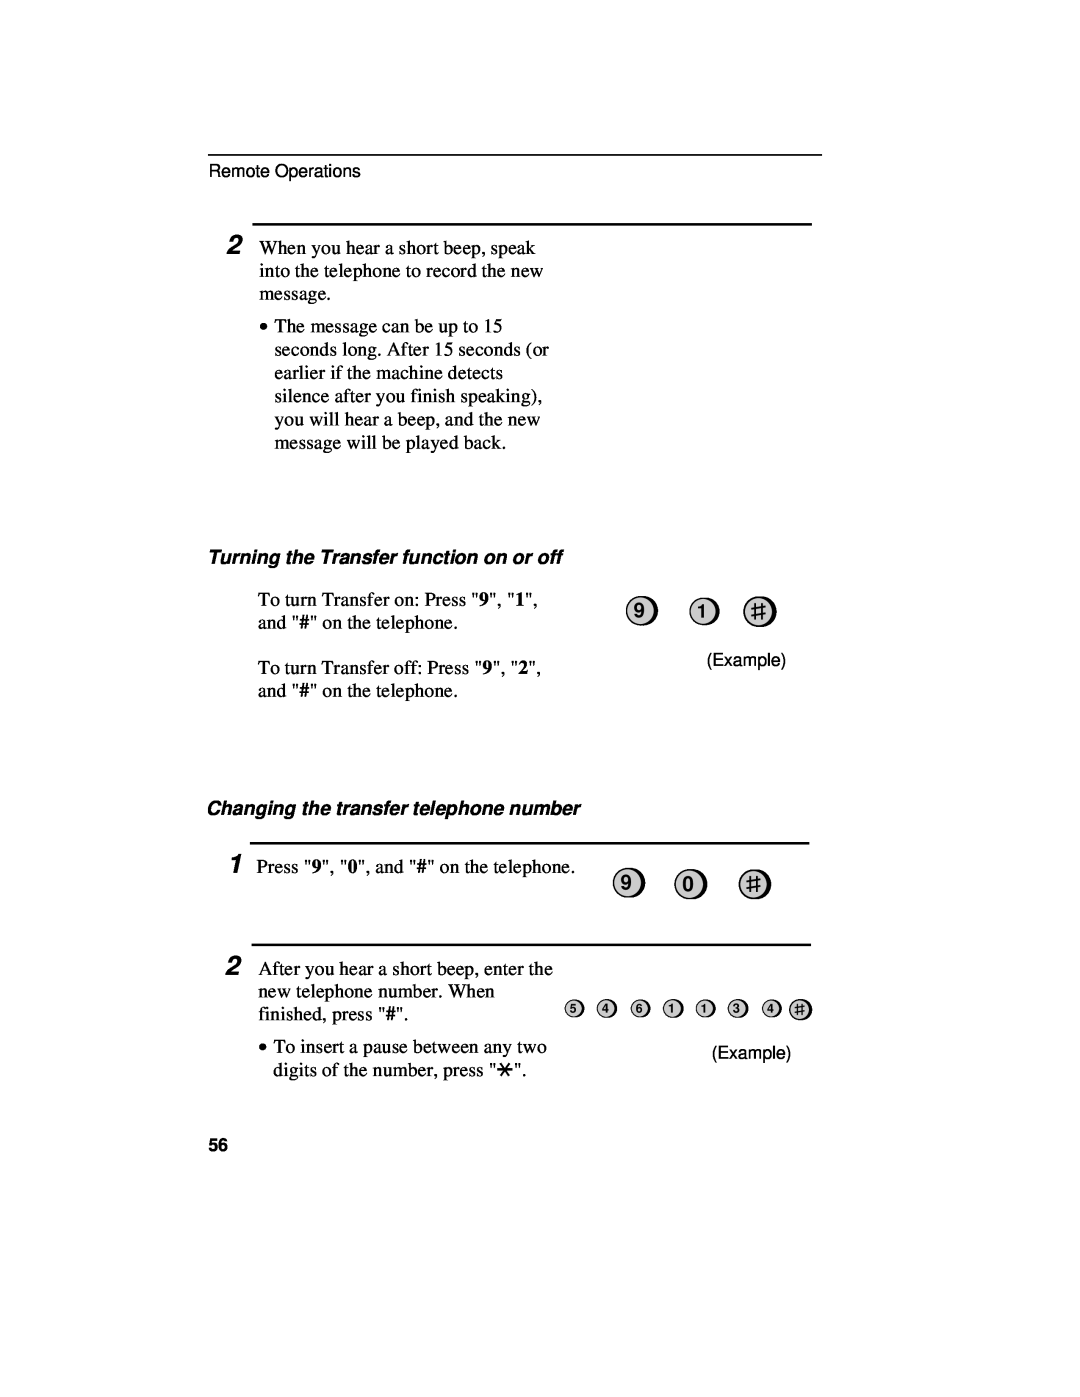 Sharp UX-460 operation manual Turning the Transfer function on or off, Changing the transfer telephone number 